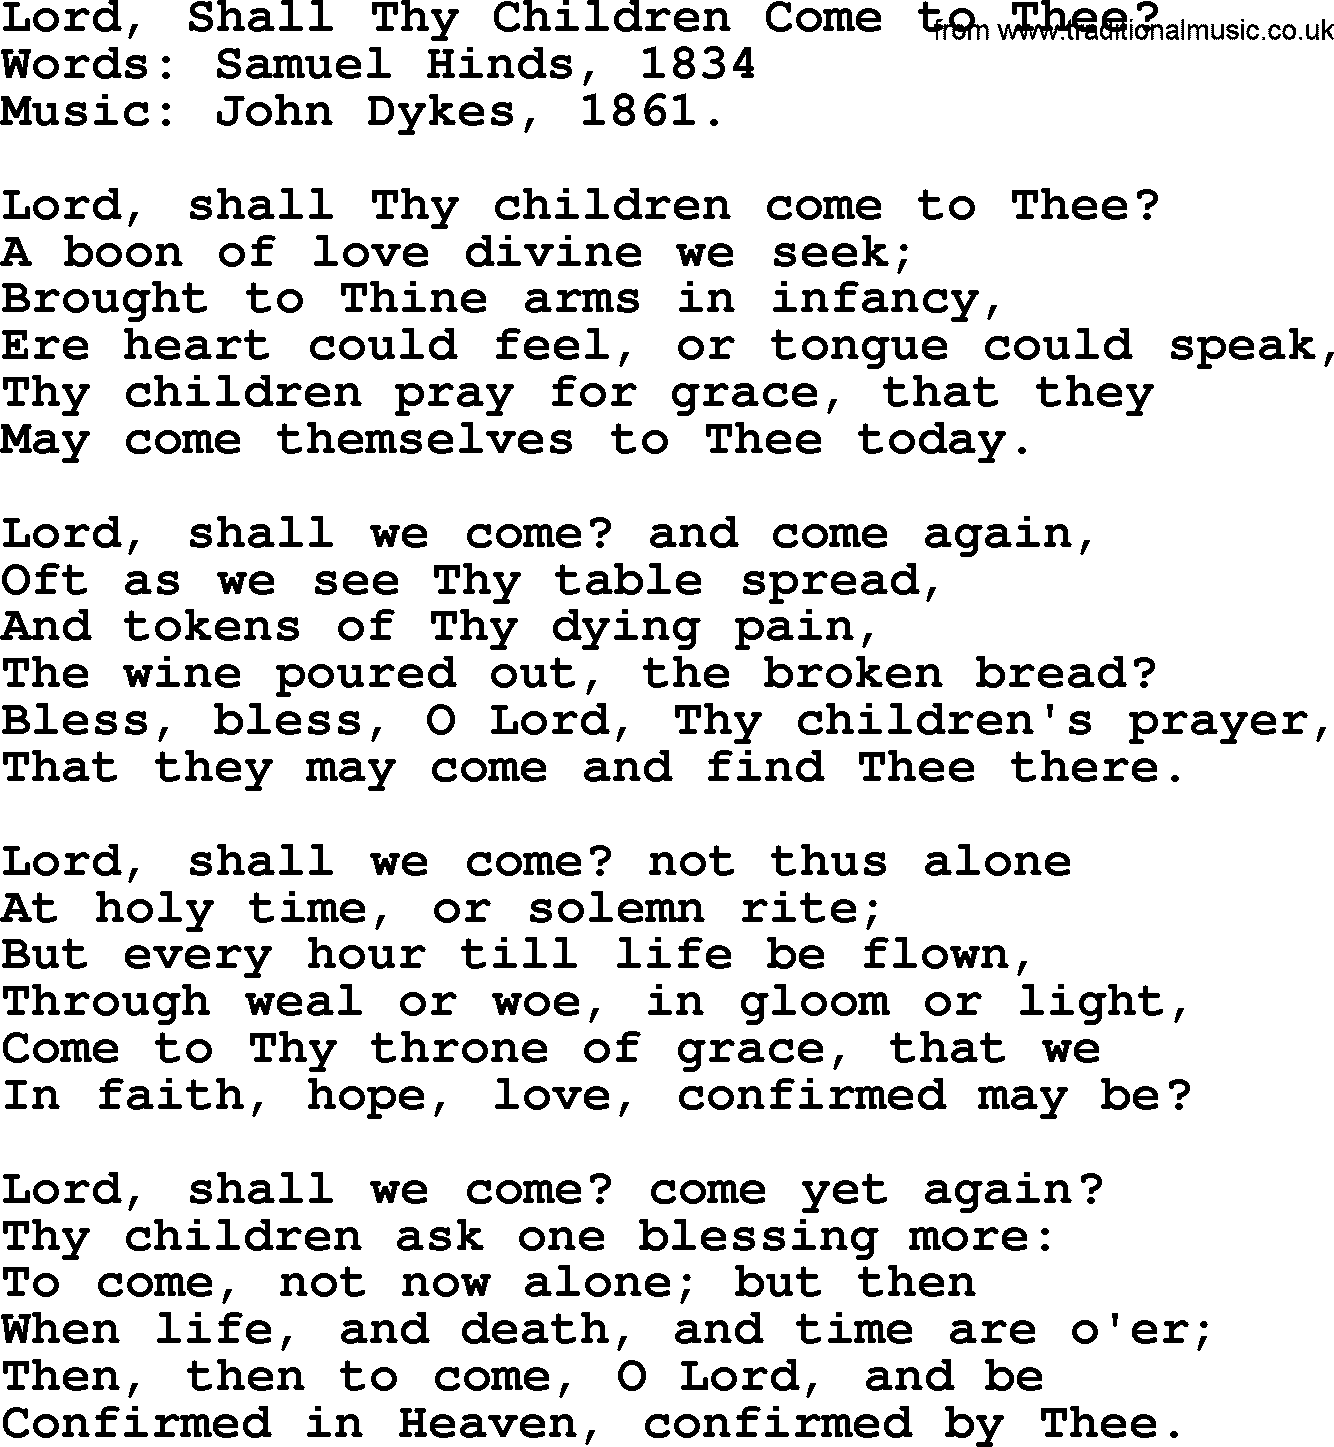 Christian hymns and song lyrics for Communion(The Eucharist): Lord, Shall Thy Children Come To Thee_, lyrics with PDF